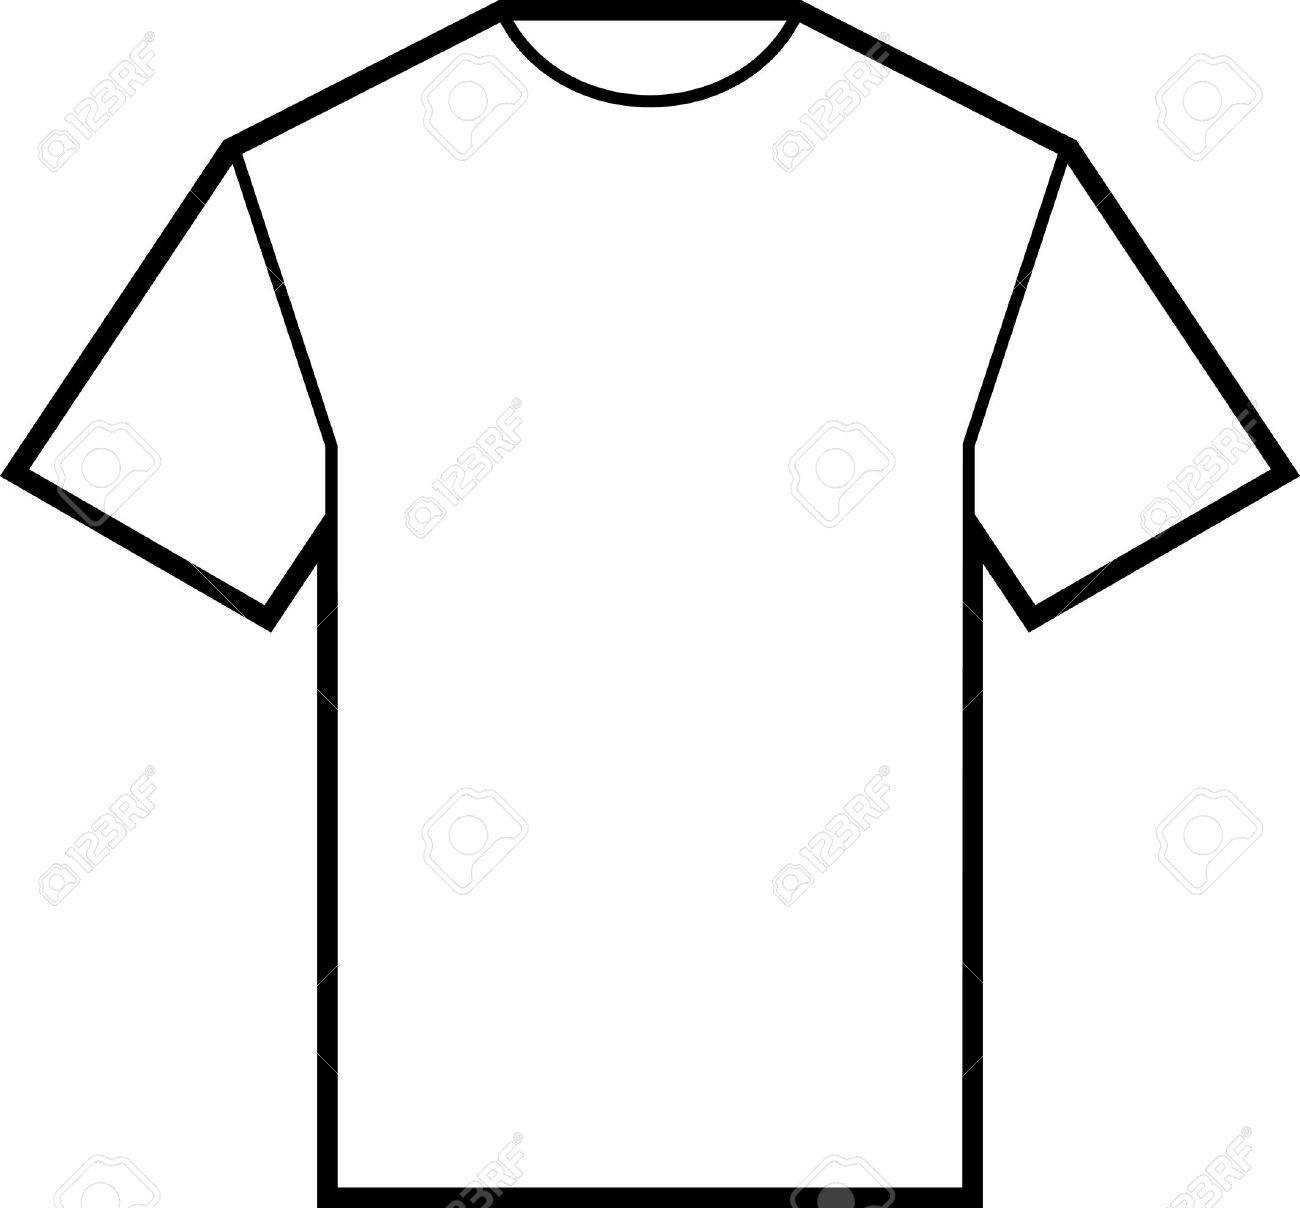 blank-white-t-shirt-template-throughout-blank-t-shirt-outline-template